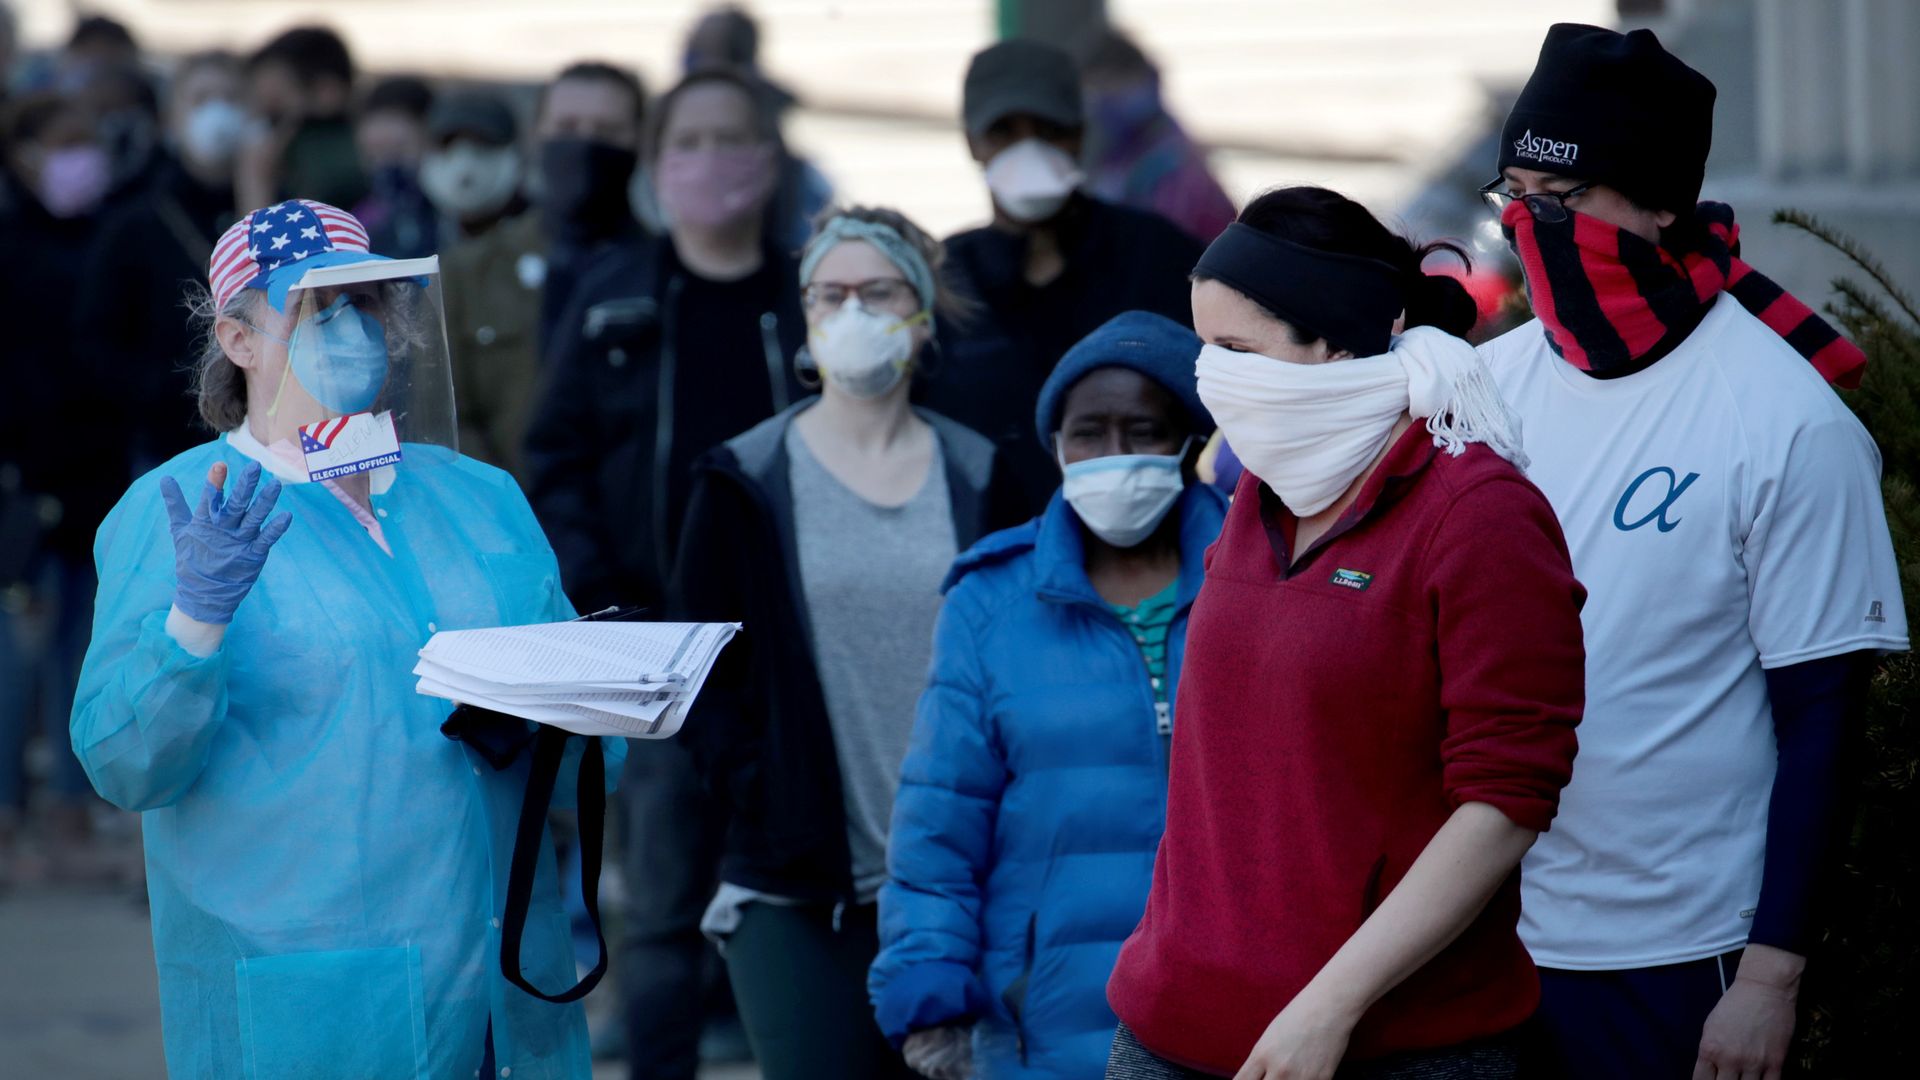 A Wisconsin poll worker wearing PPE guides people through a line. Photo: Scott Olson/Getty Images